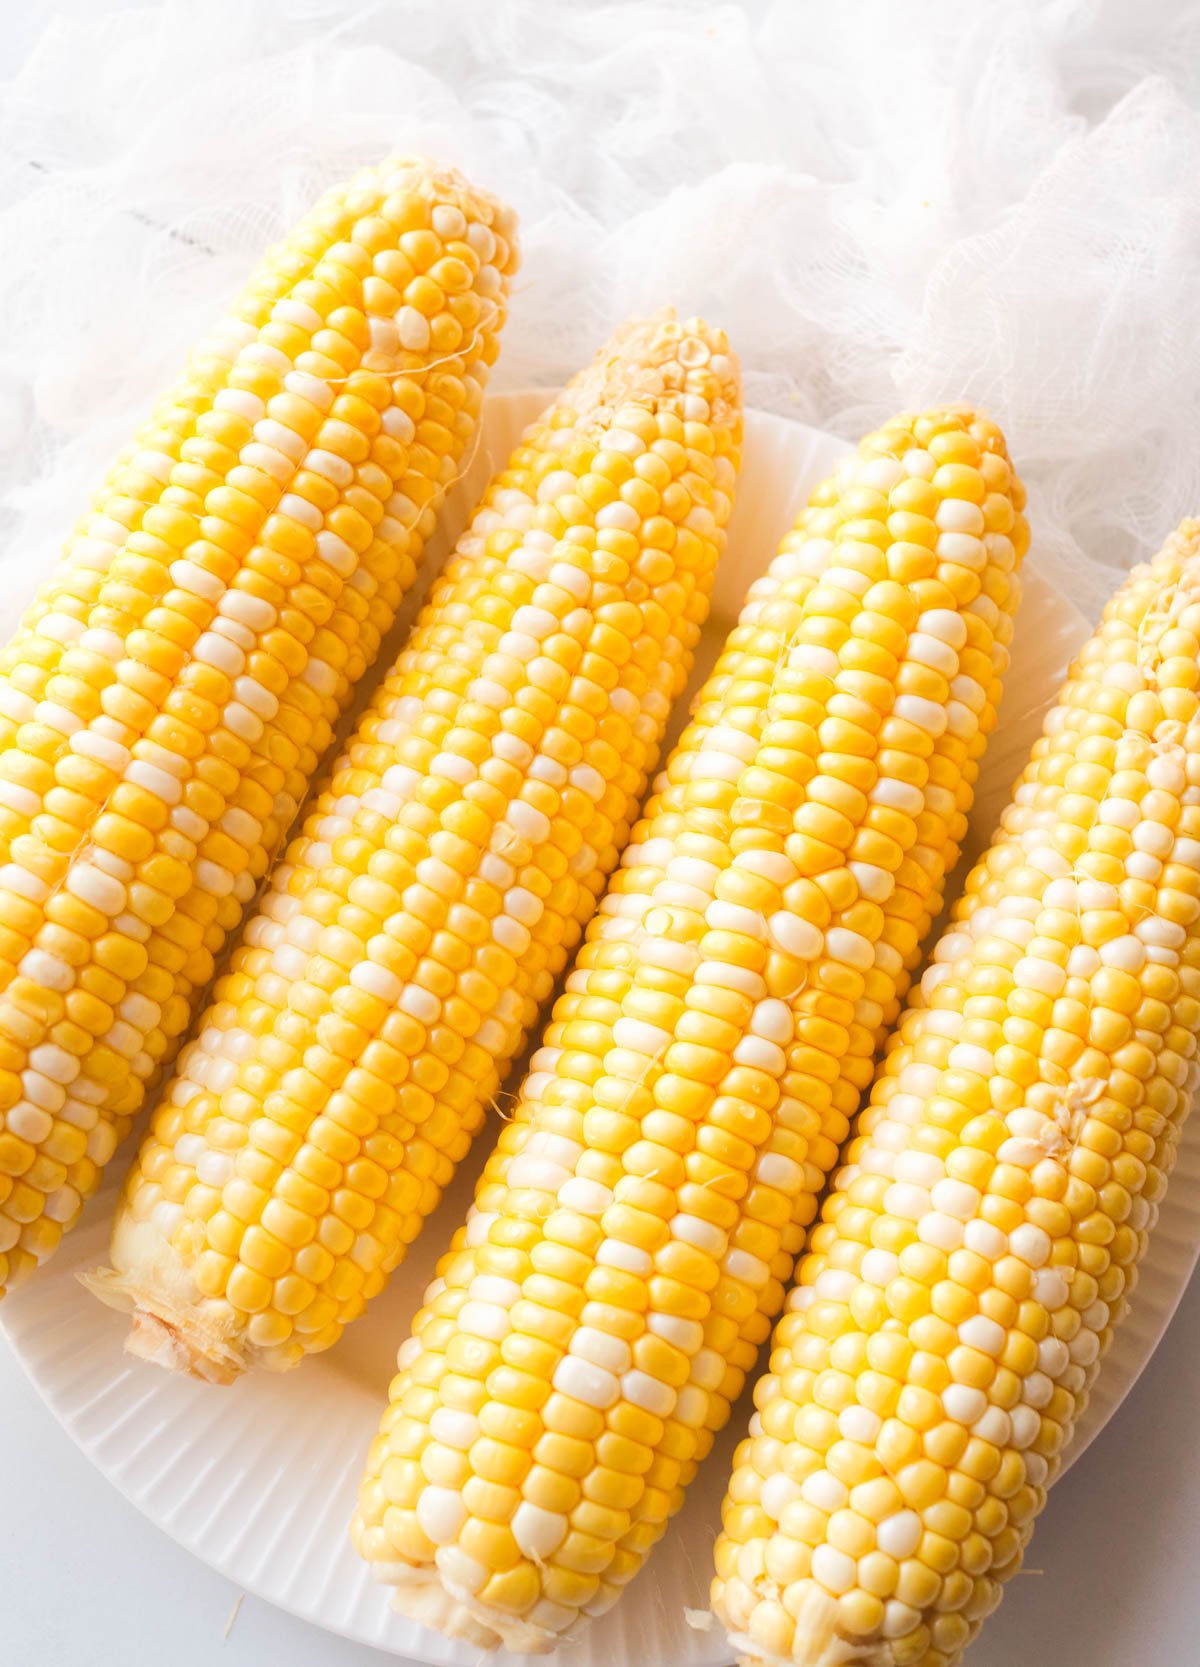 Four ears of corn shucked and cleaned on a white plate.